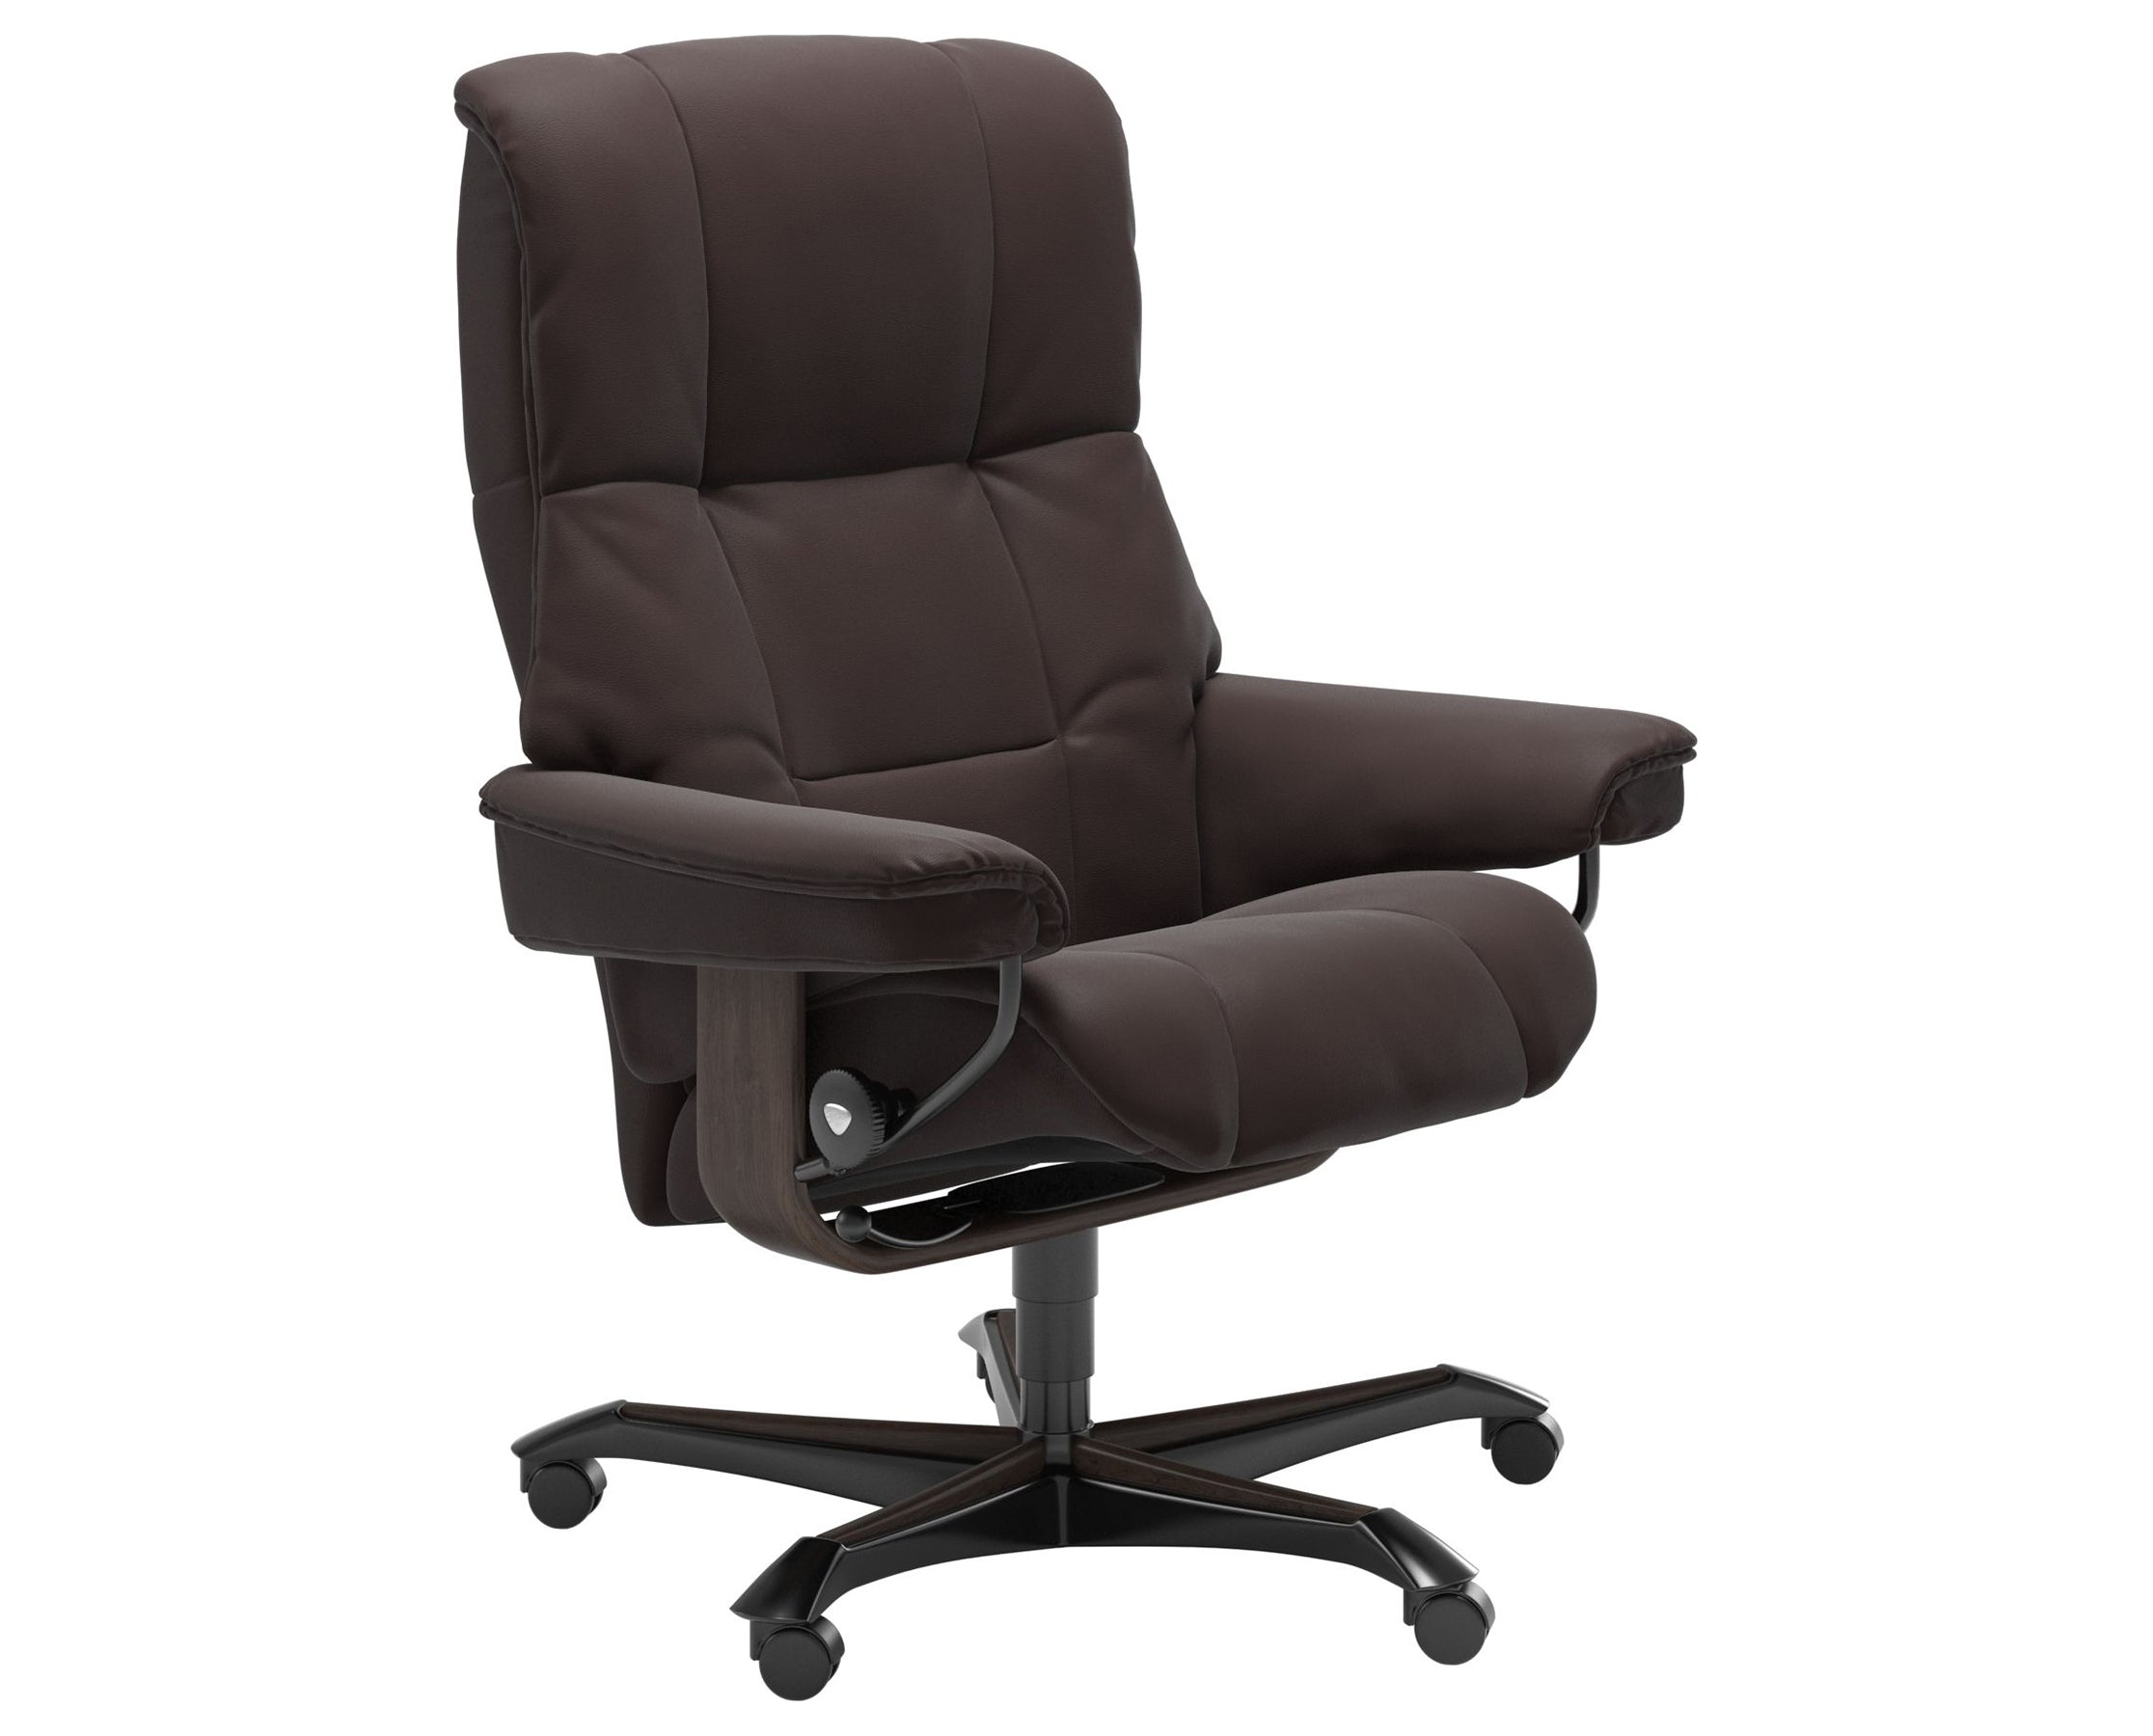 Paloma Leather Chocolate M and Wenge Base | Stressless Mayfair Home Office Chair | Valley Ridge Furniture